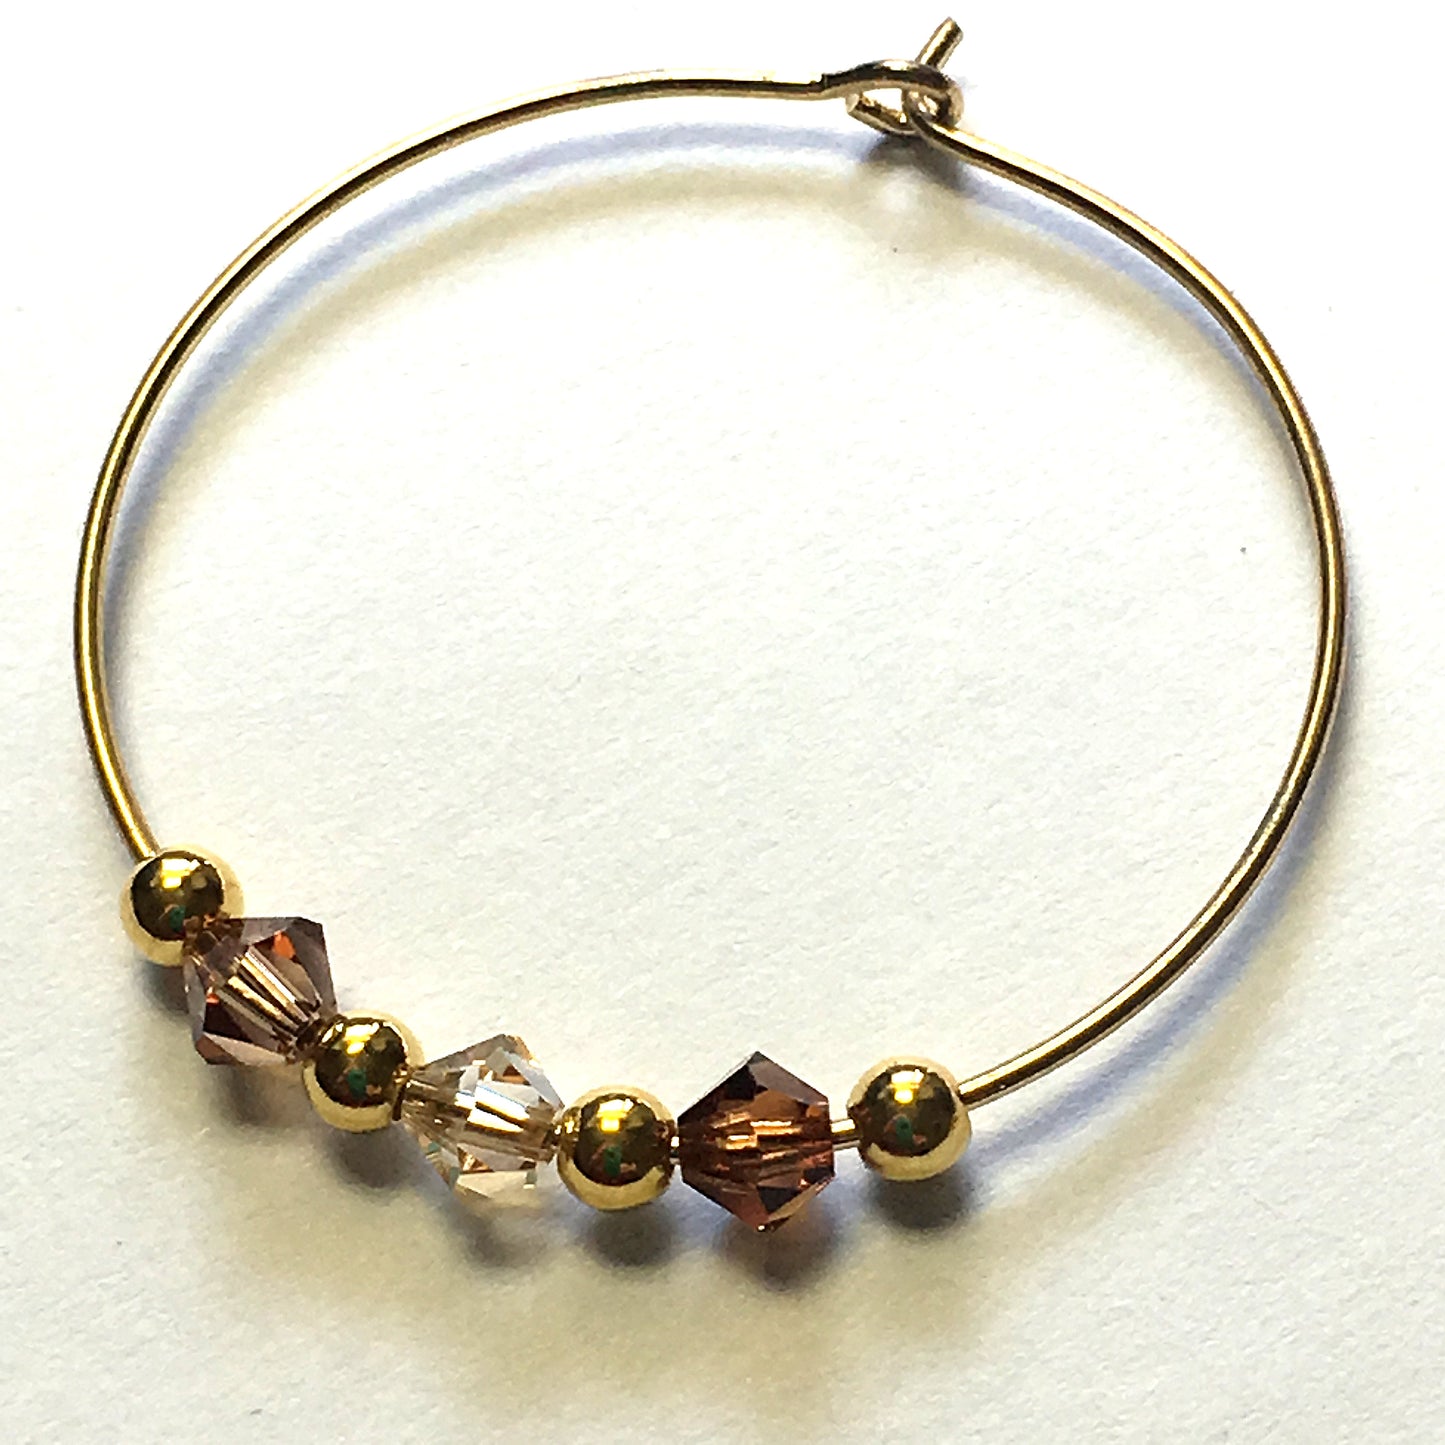 Shades of Brown Swarovski Crystals on Gold Plated Earring Hoops